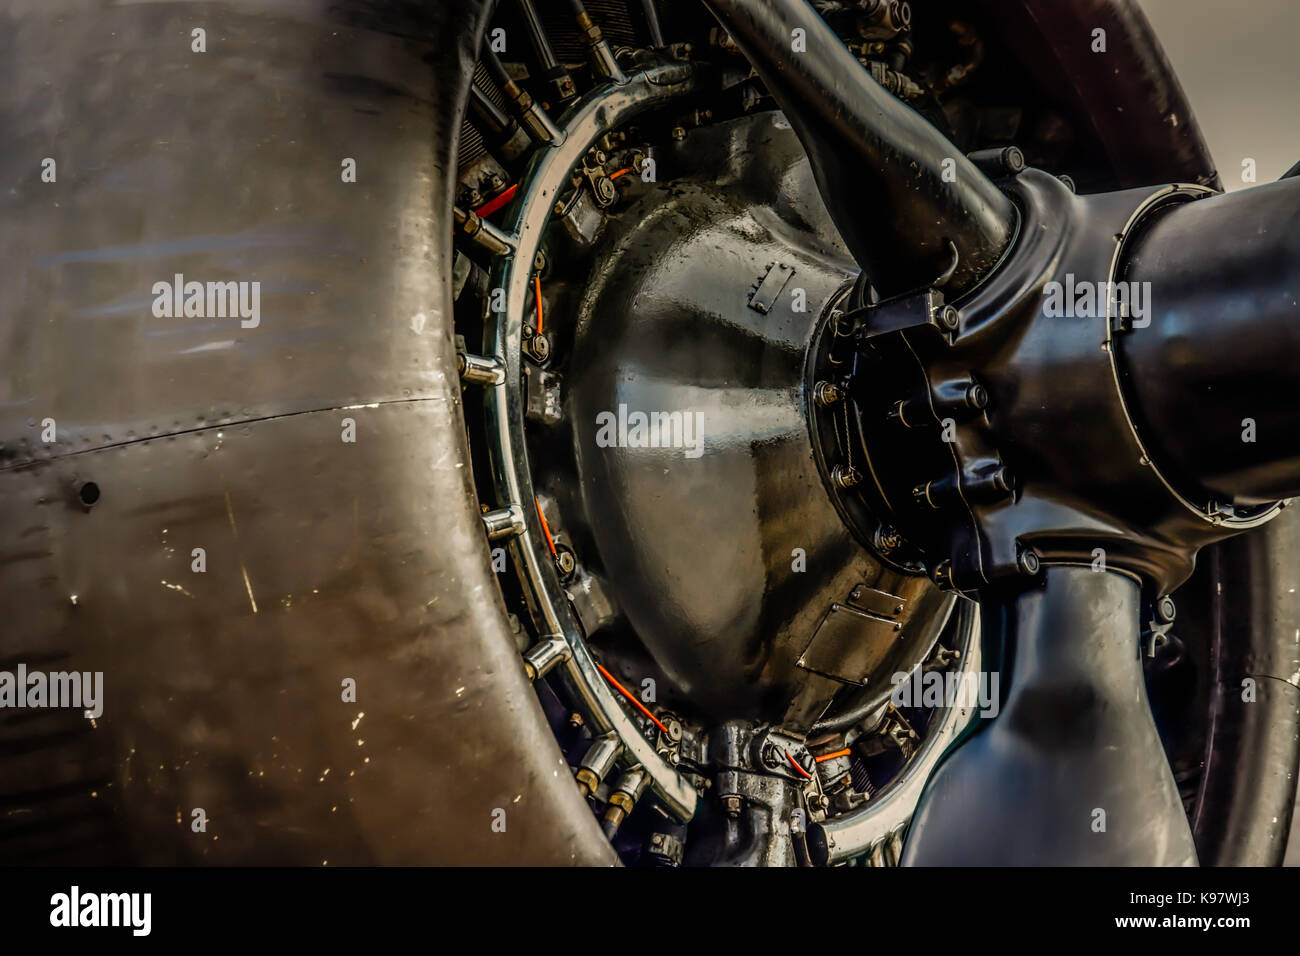 The side view of the propellor of a World War Two era bomber. Stock Photo